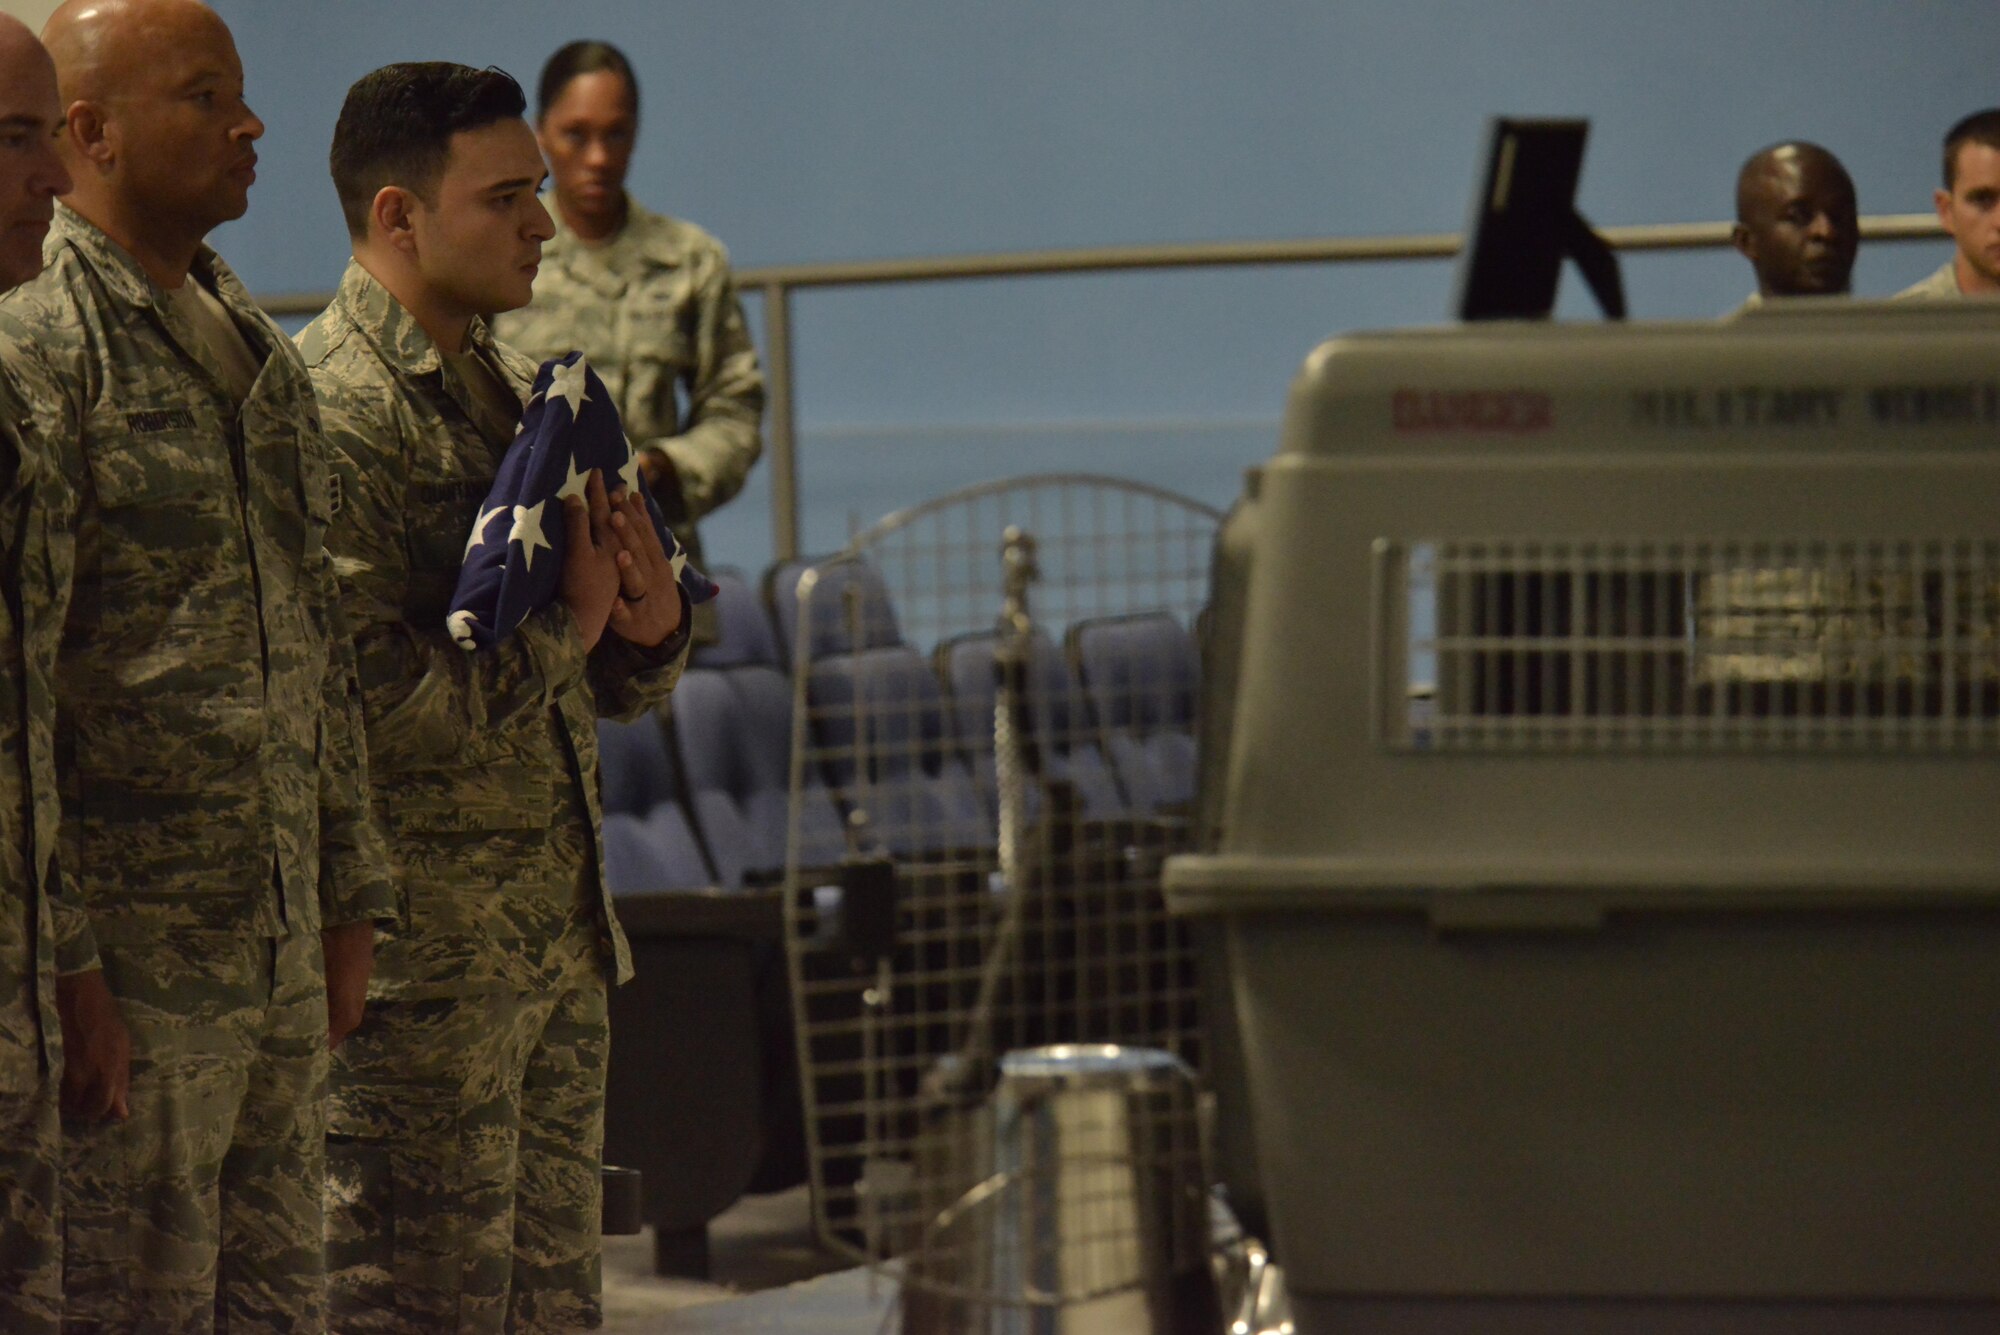 Senior Airman Jerry Quintanilla, 379th Expeditionary Security Forces Squadron holds a folded U.S. flag that was presented to him in honor of Military Working Dog Jonny May 2, 2015 at the Blatchford-Preston Complex at Al Udeid Air Base, Qatar.  Jonny and Quintanilla worked side by side daily for three months before Jonny passed away due to medical complications. ( U.S. Air Force photo by Staff Sgt. Alexandre Montes)